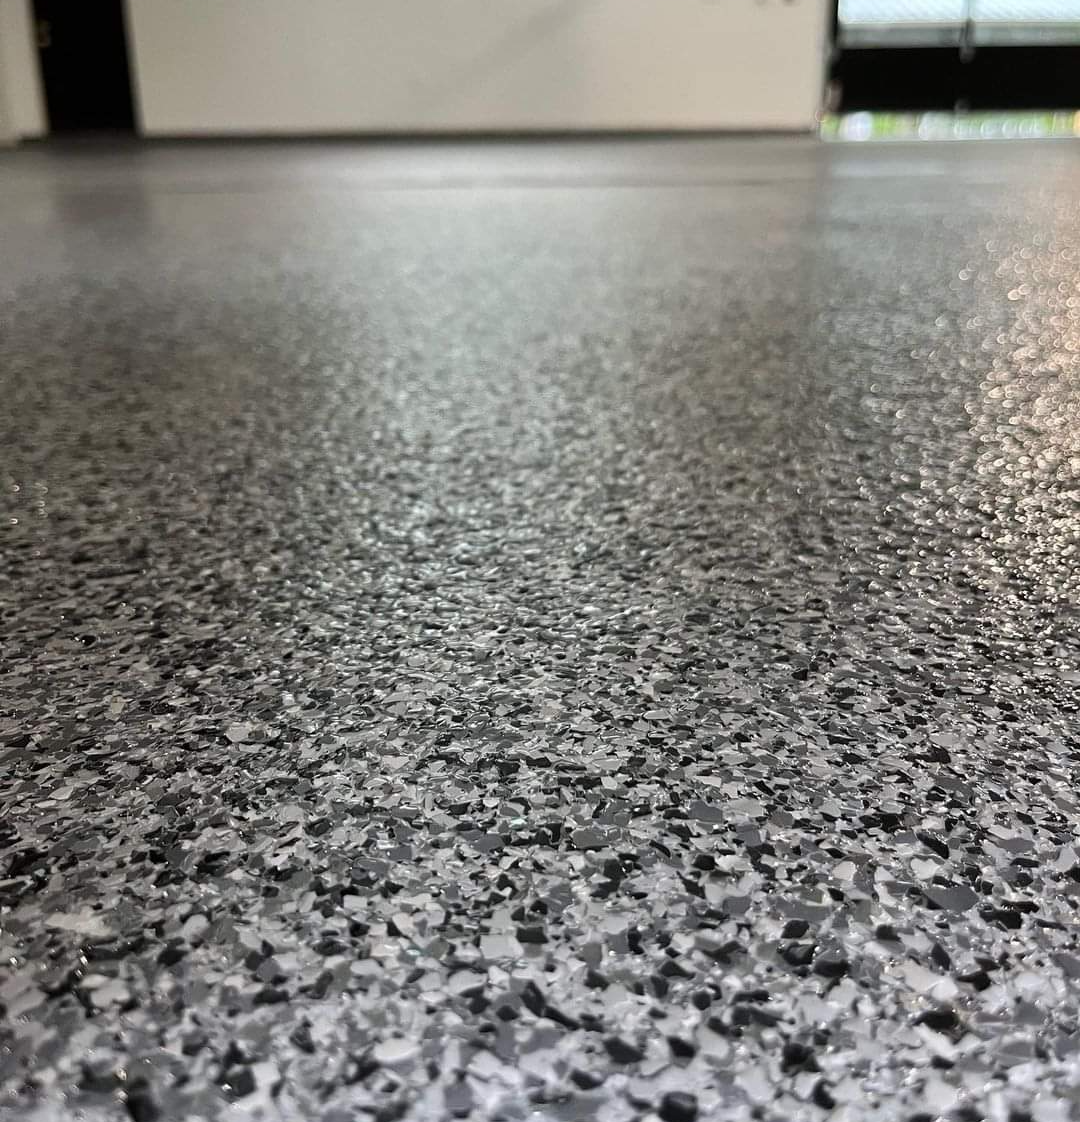 An up close photo of the textured surface of this epoxy floor.